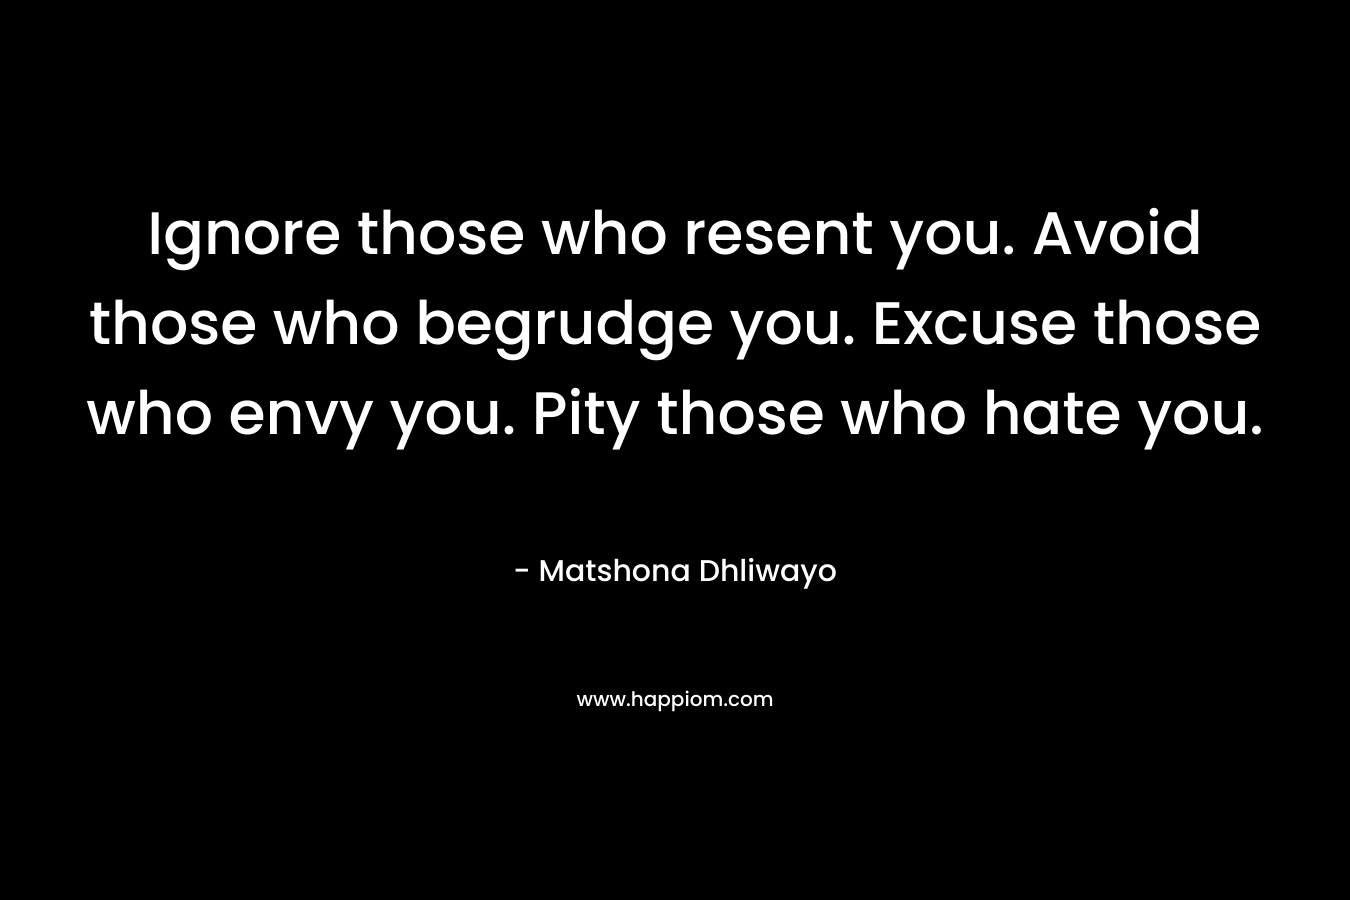 Ignore those who resent you. Avoid those who begrudge you. Excuse those who envy you. Pity those who hate you.